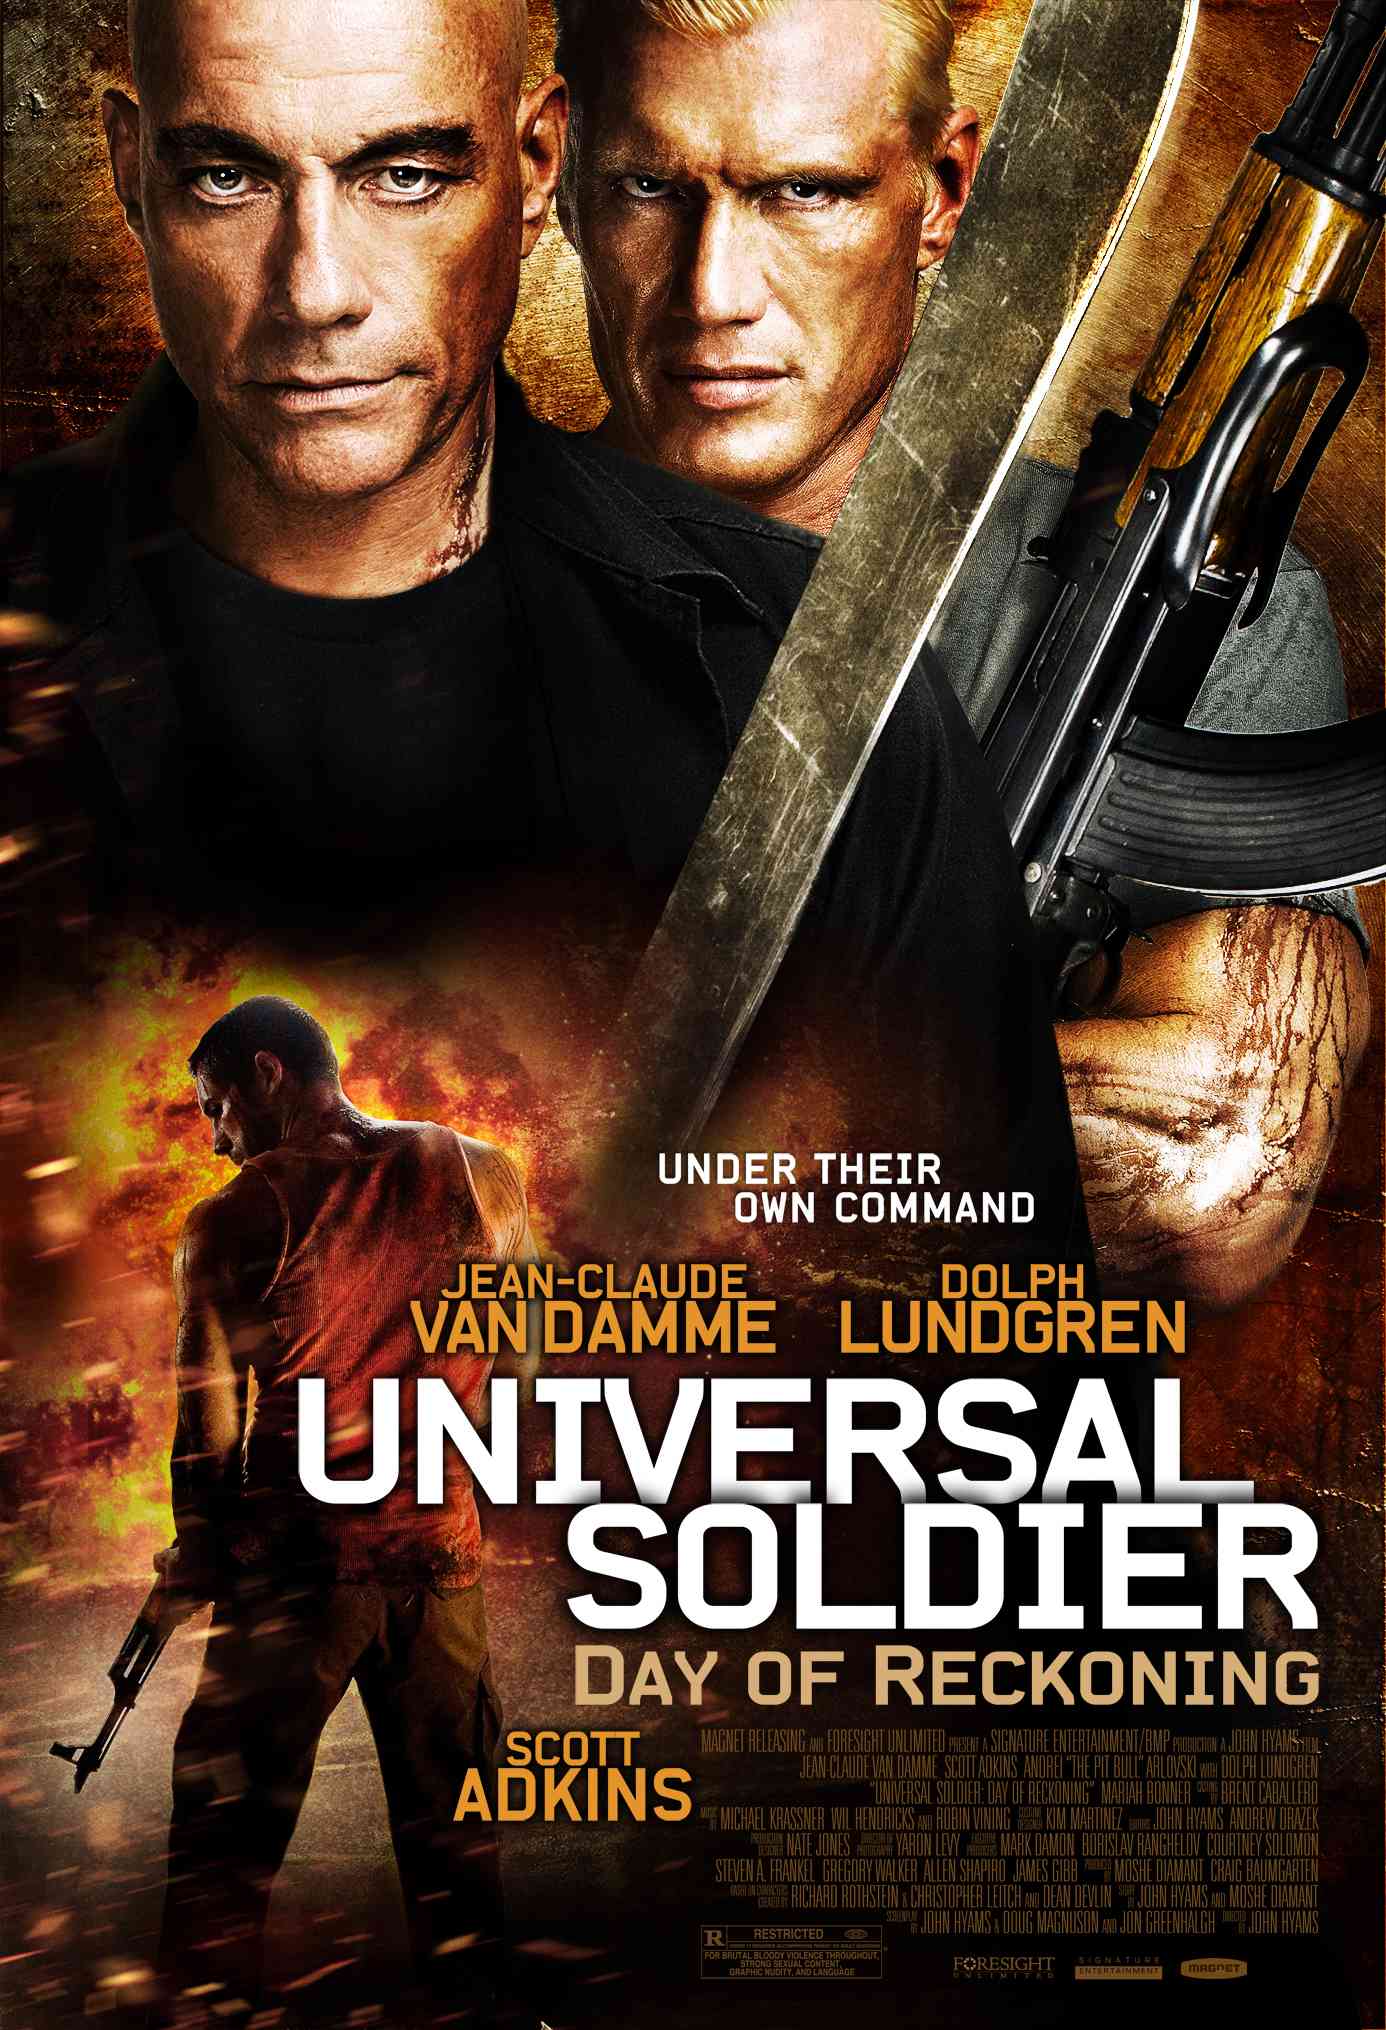 FULL MOVIE: Universal Soldier: Day Of Reckoning (2012)